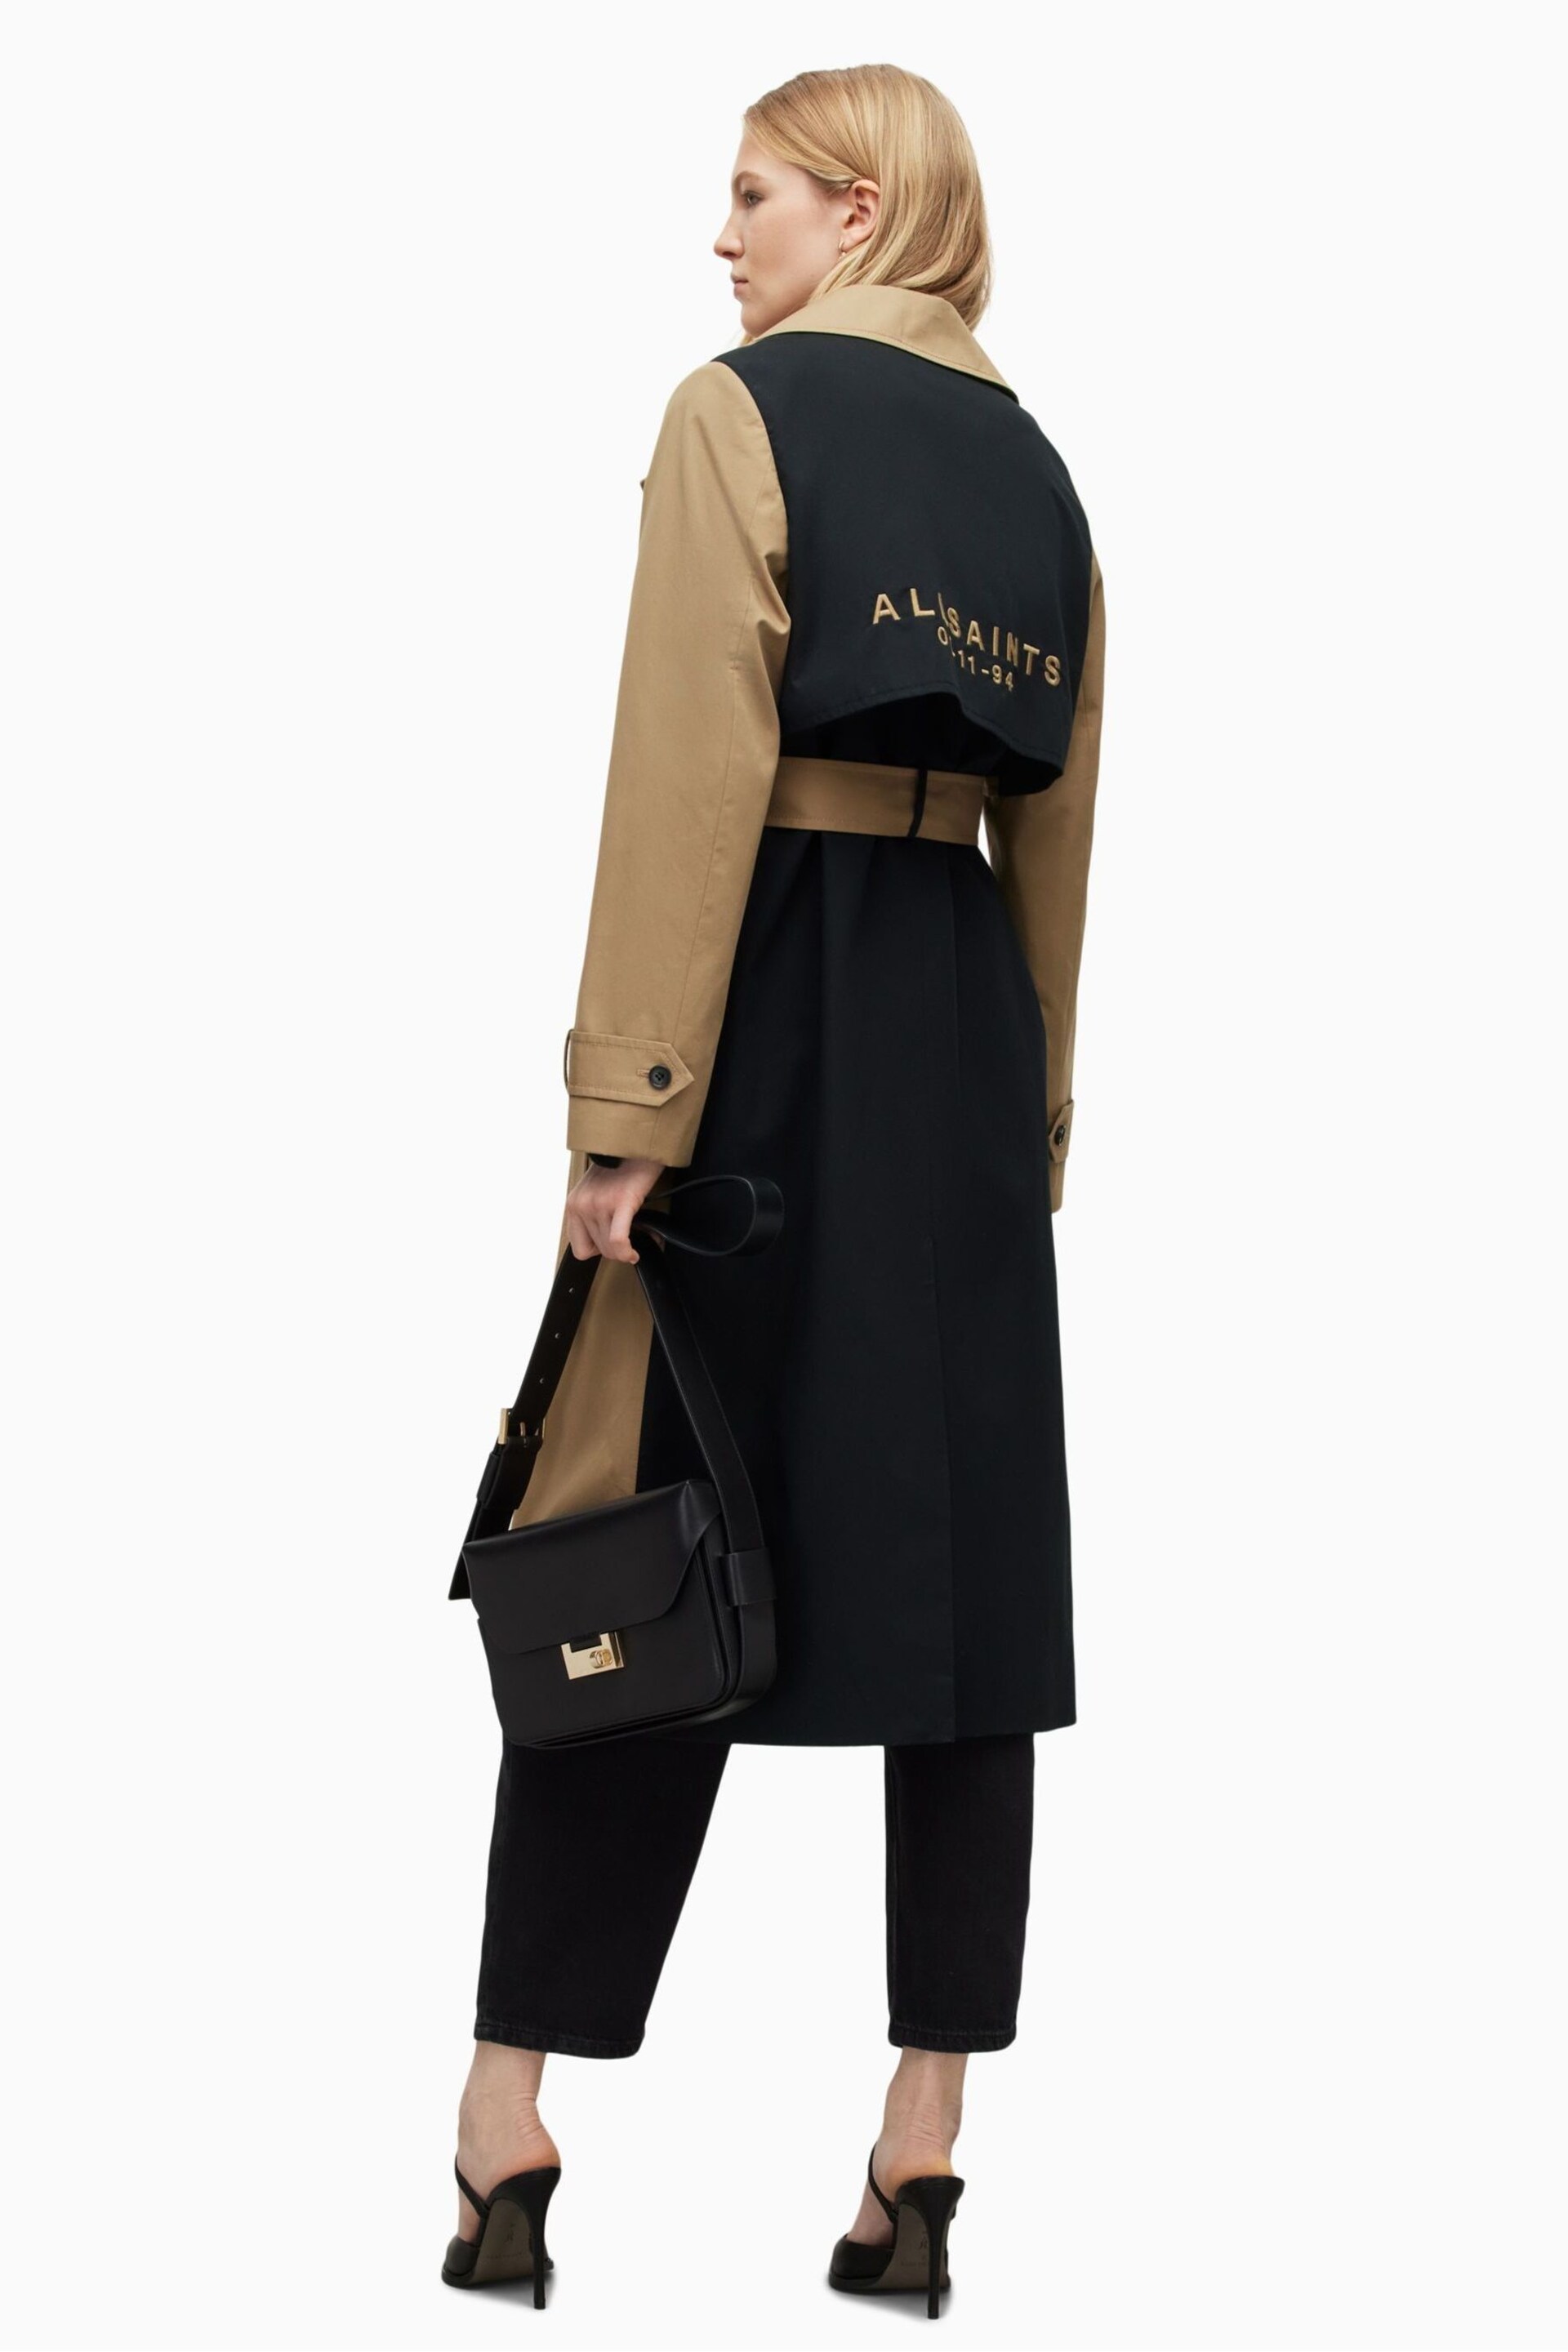 AllSaints Black Mixie Trench Coat - Image 2 of 8